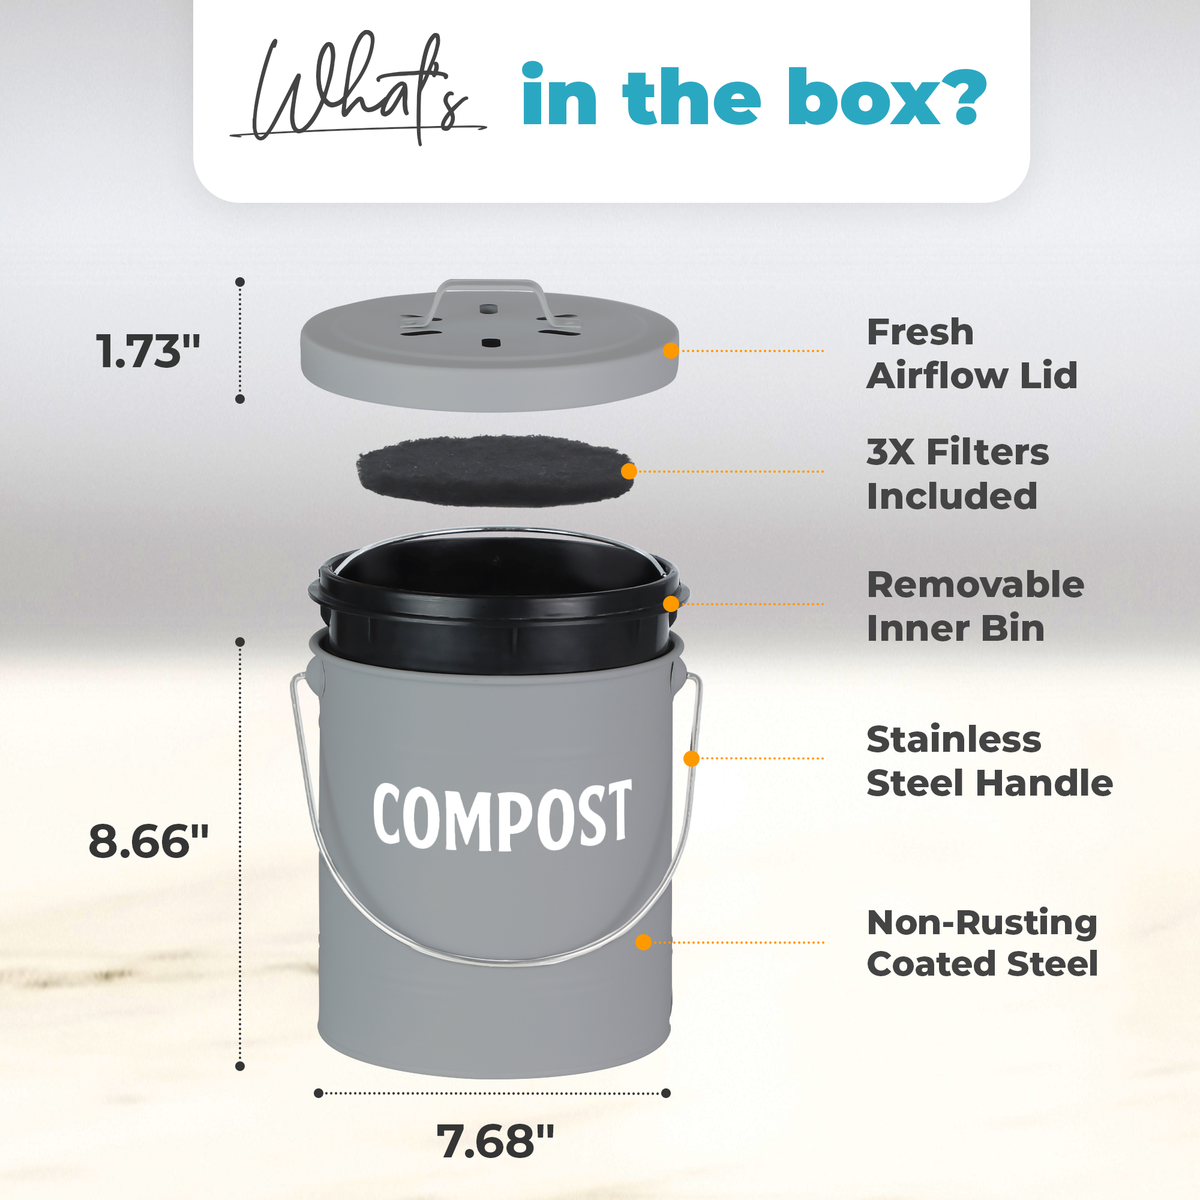 Package inclusions and dimensions of the Gray compost bin